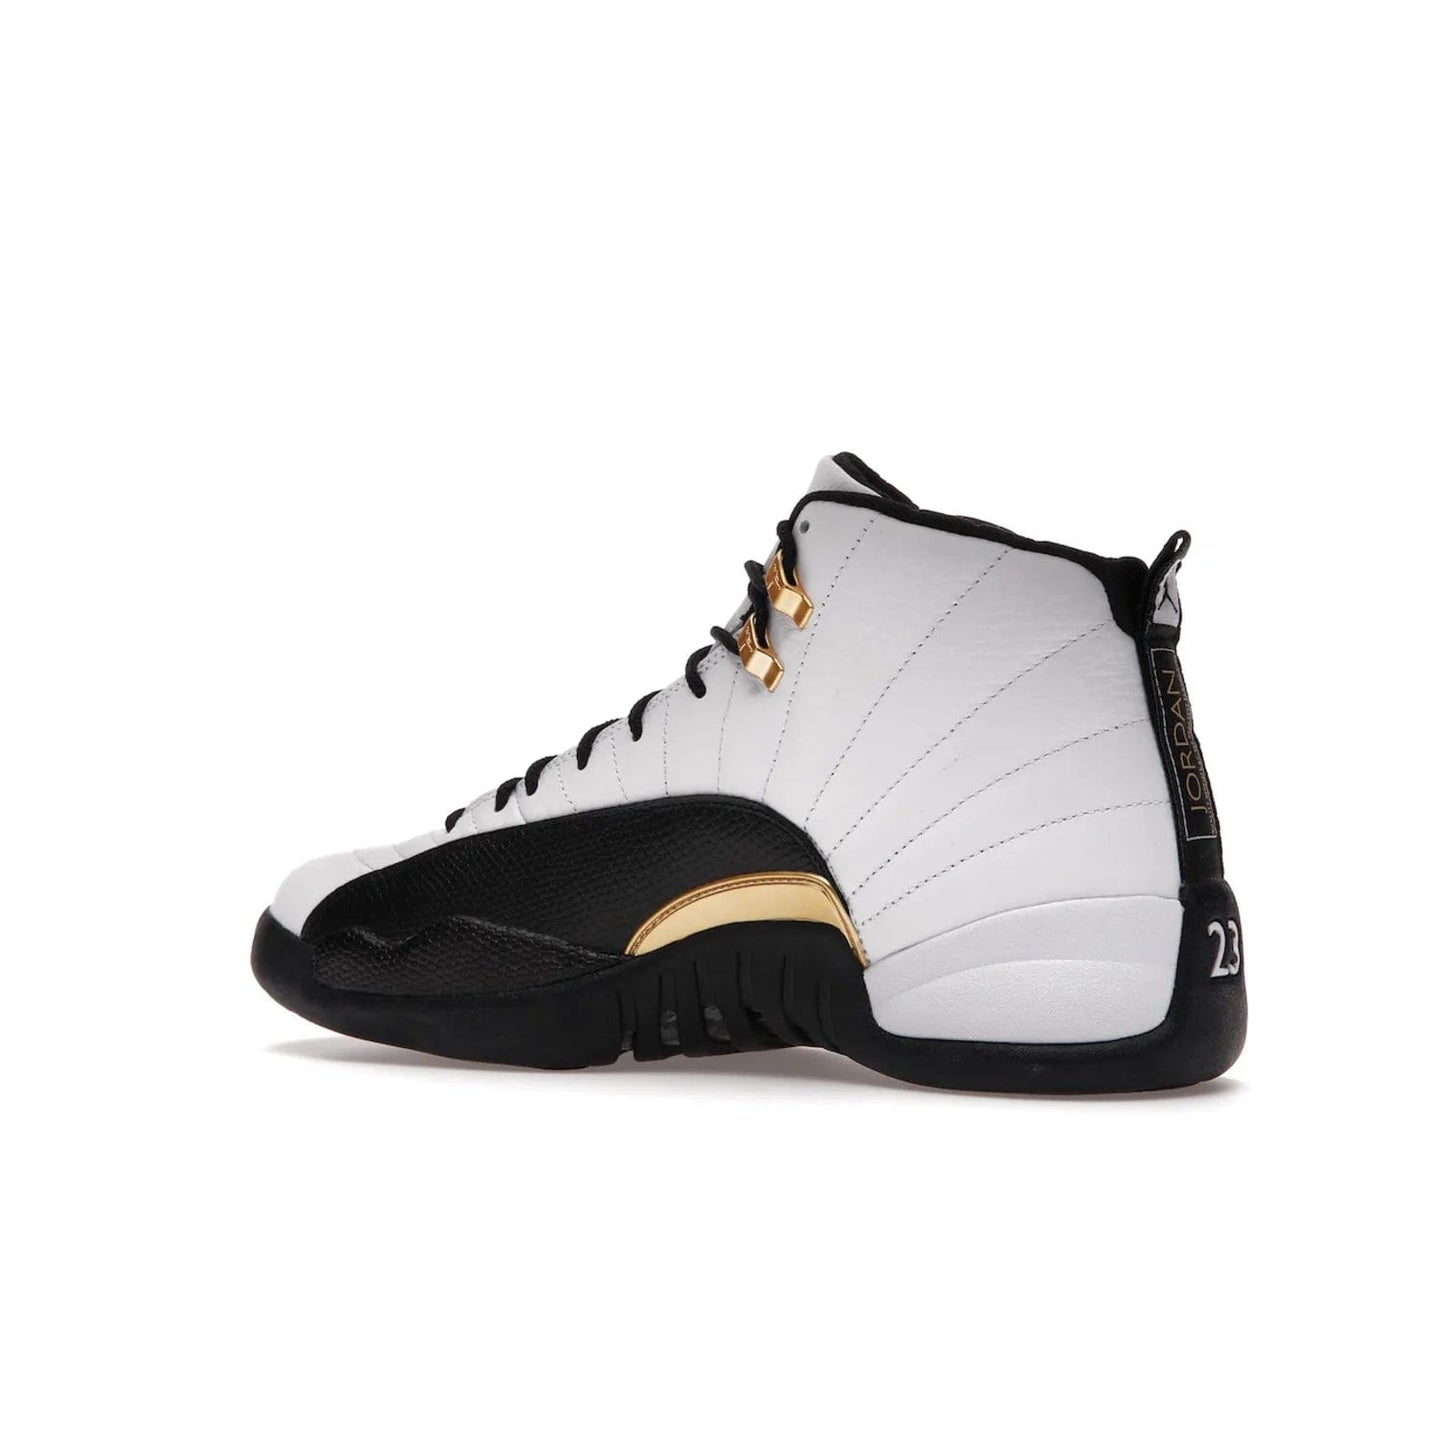 Jordan 12 Retro Royalty Taxi - Image 22 - Only at www.BallersClubKickz.com - Make a statement with the Air Jordan 12 Retro Royalty Taxi. Woven heel tag, gold plaquet, white tumbled leather upper plus a black toe wrap, make this modern take on the classic a must-have. Available in November 2021.